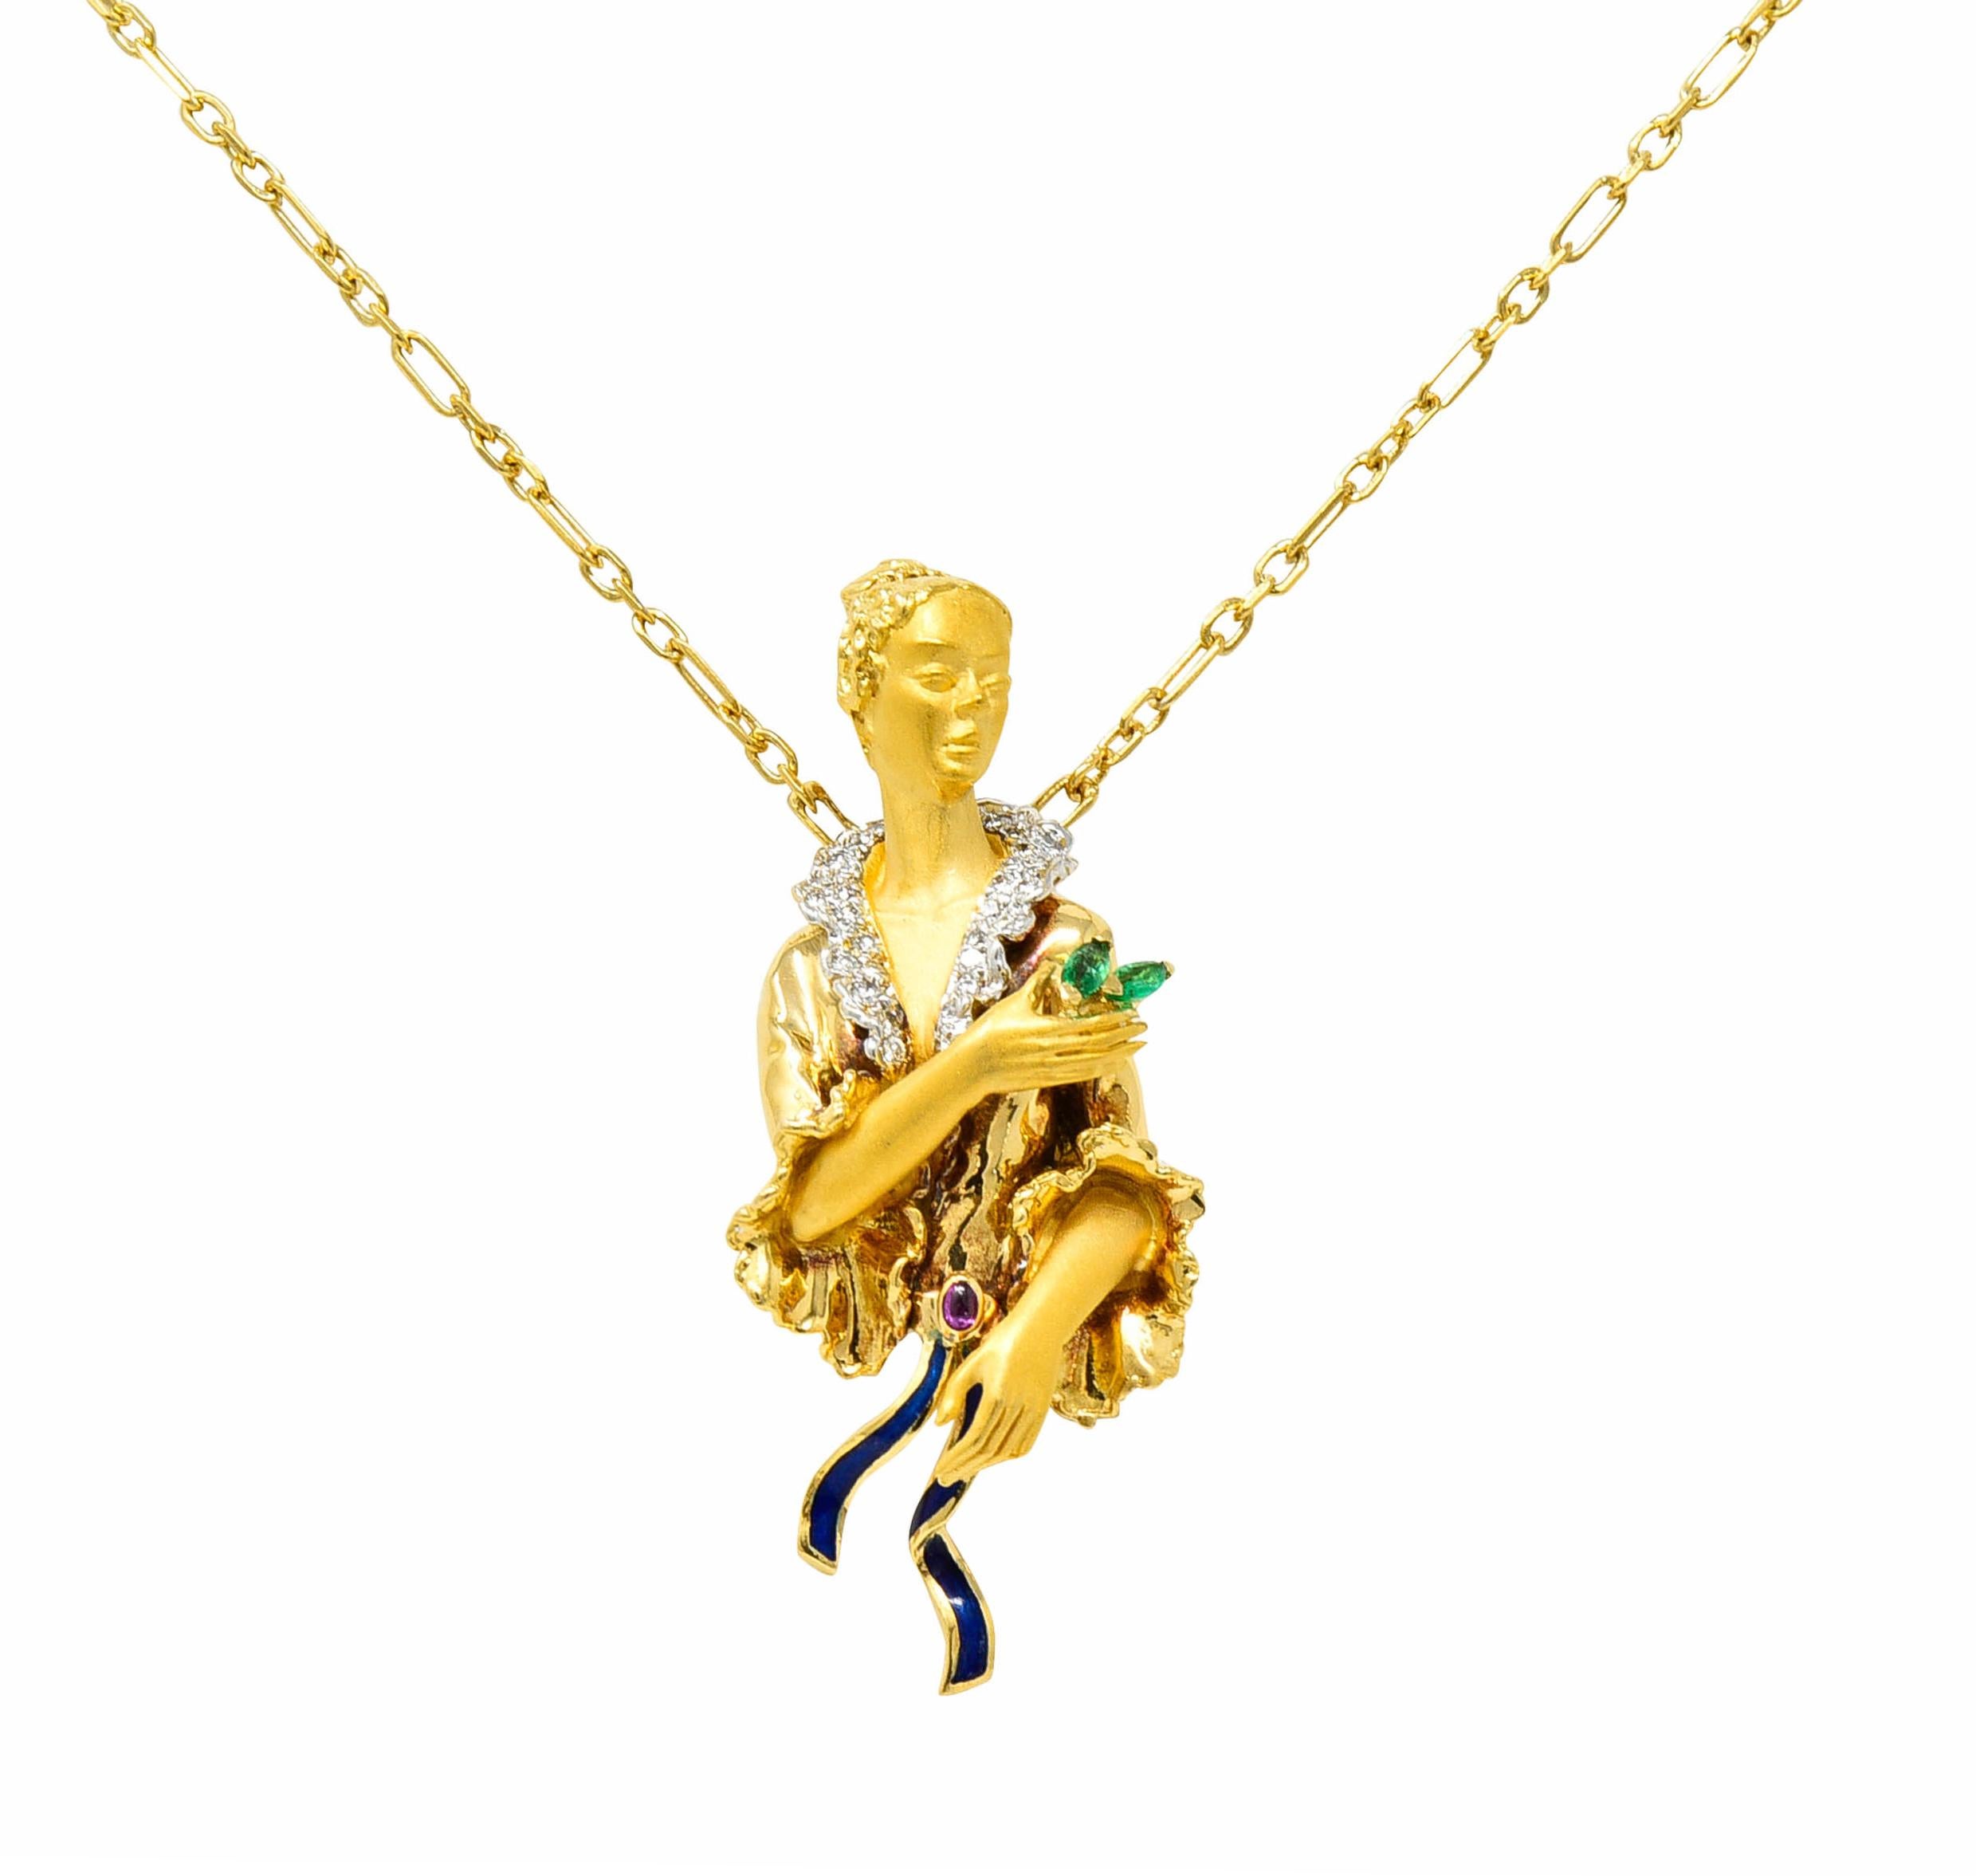 Paperclip chain necklace centers a highly rendered depiction of a noble woman

Adorned in a highly polished ruffled dress while skin is matte gold

Collar is set with round brilliant cut diamonds weighing in total approximately 0.20 carat - eye